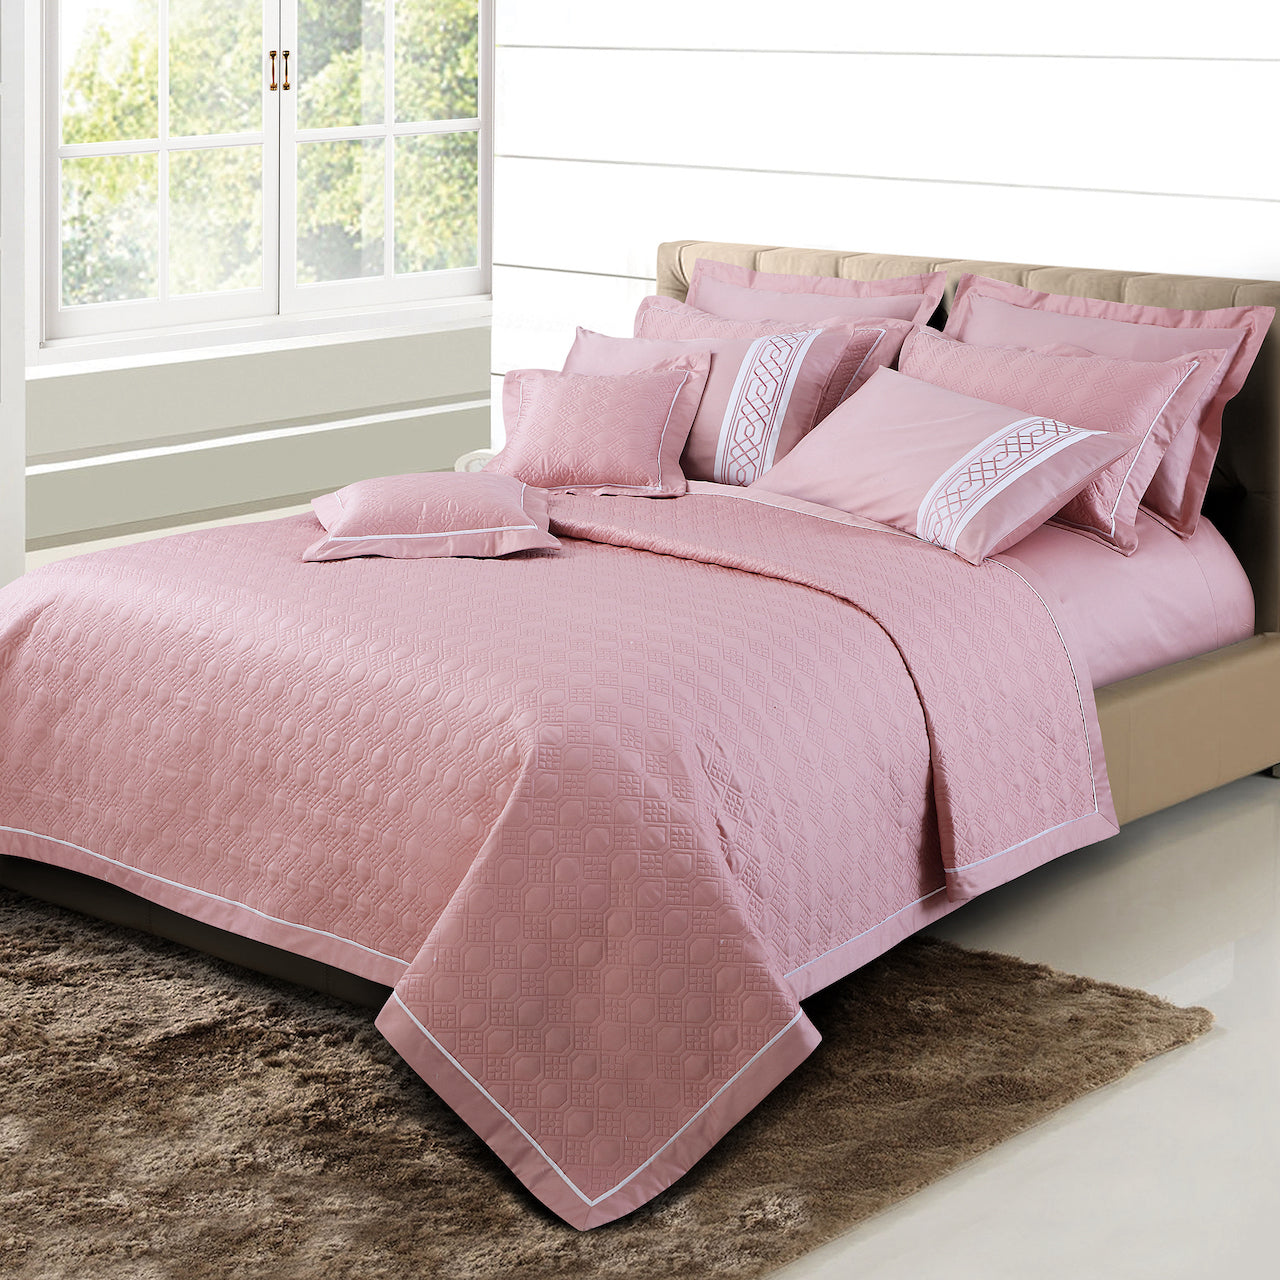 Kairo Quilted Bedcover - Rose Pink